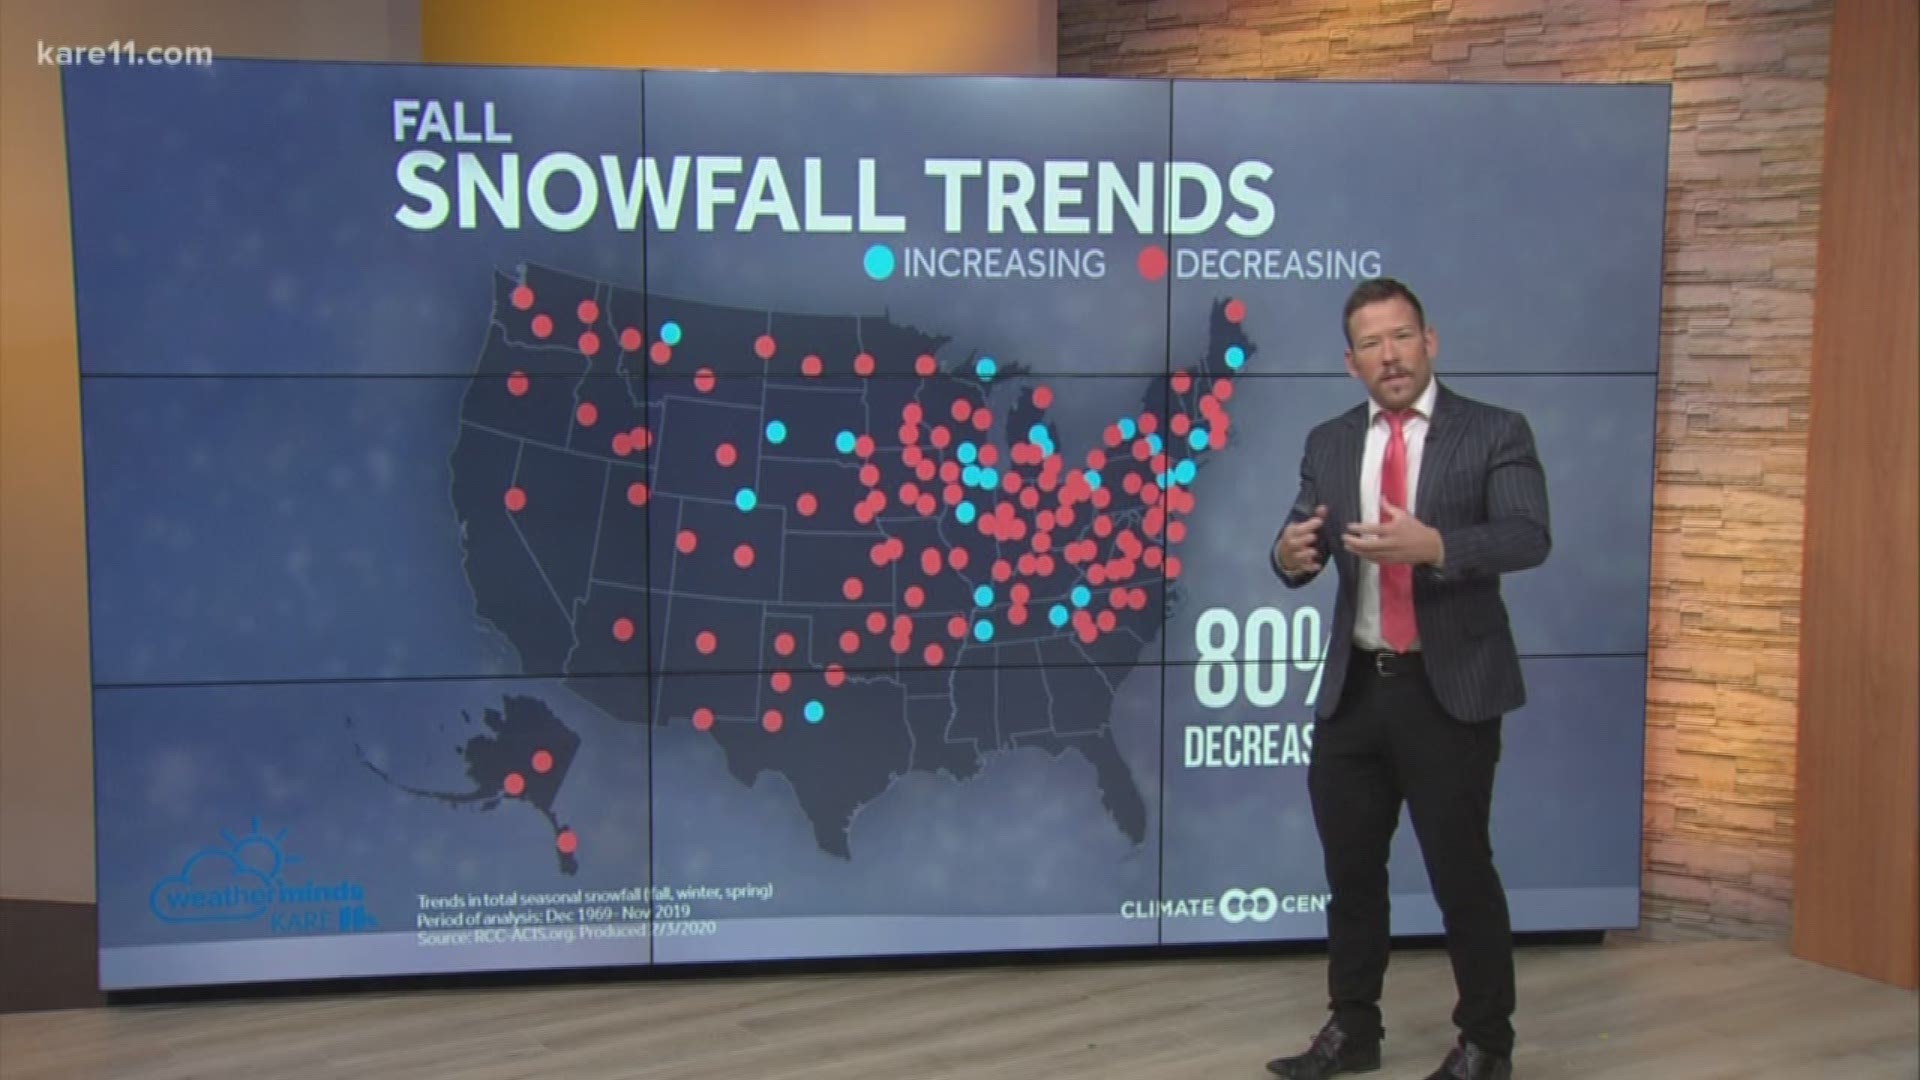 Studies show that snow in the fall is decreasing, but the same amount of snow falls in the winter and spring.